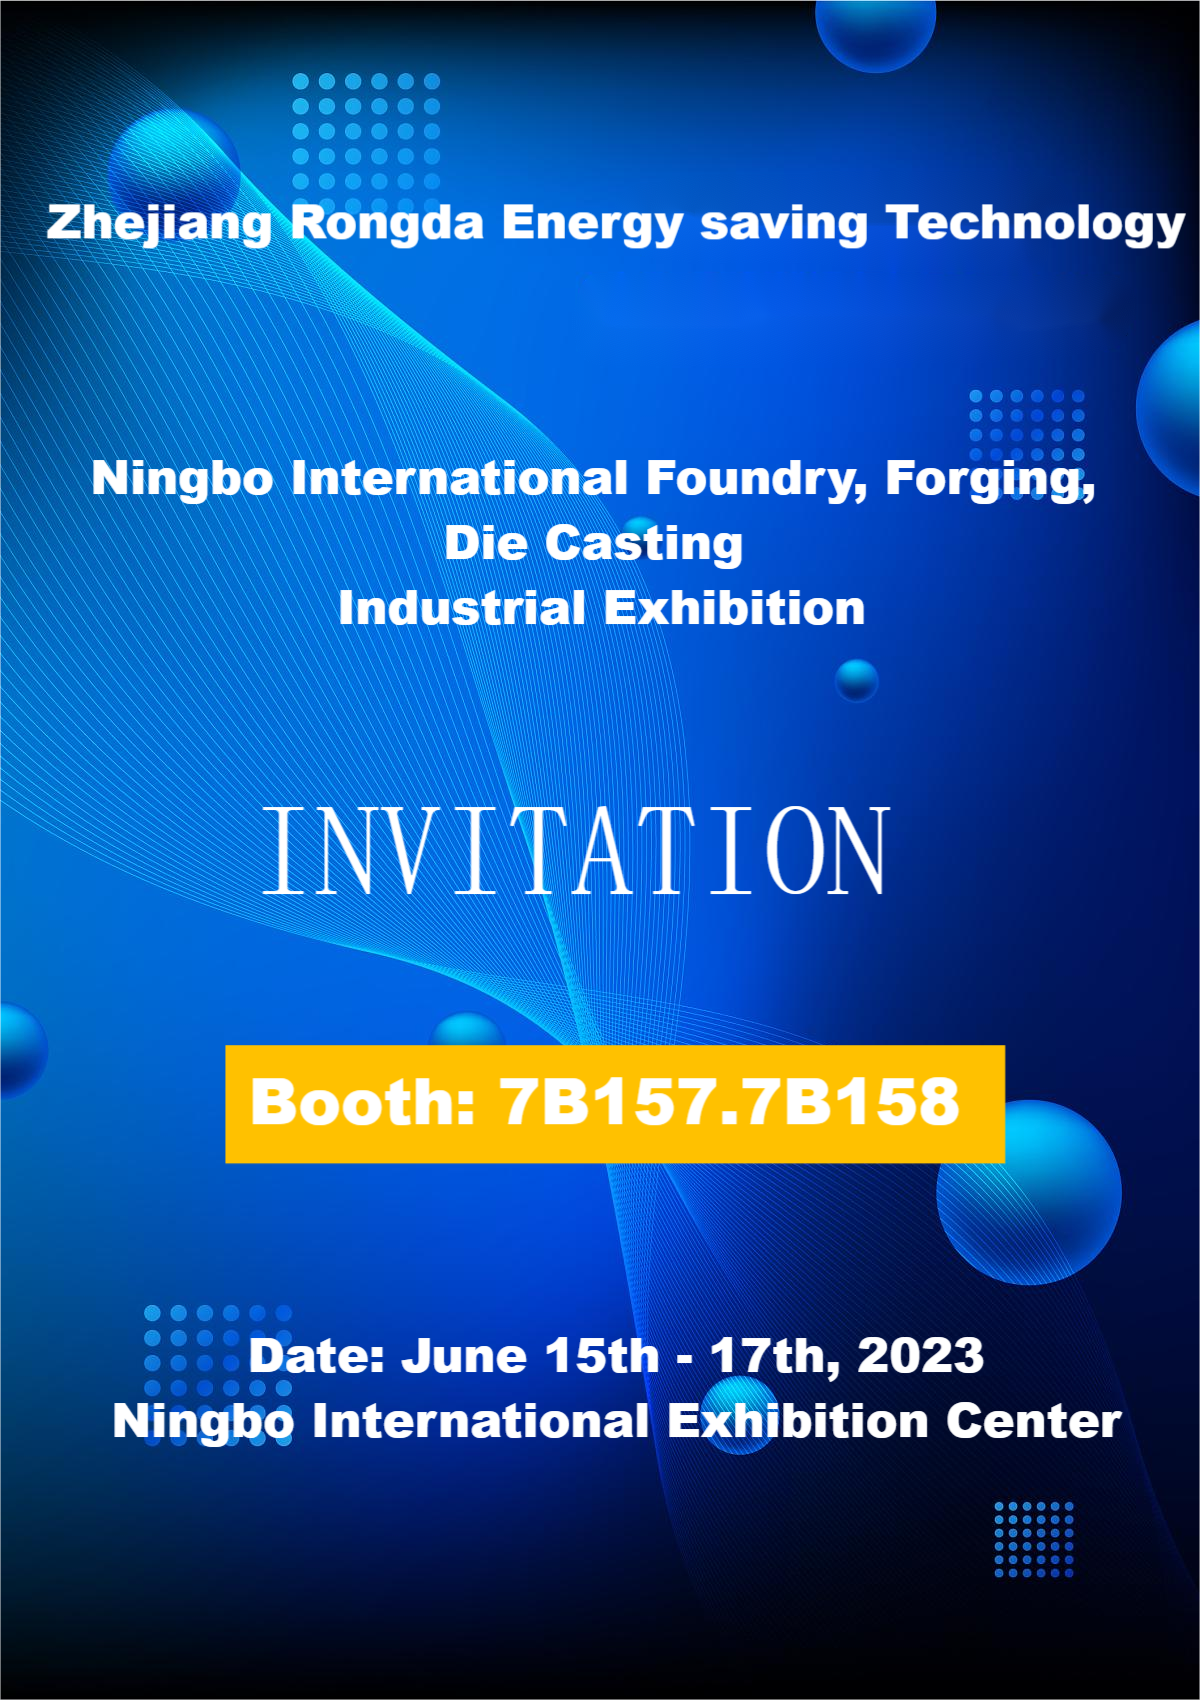 Join Us at Ningbo International Foundry, Forging, and Die Casting Industrial Exhibition!